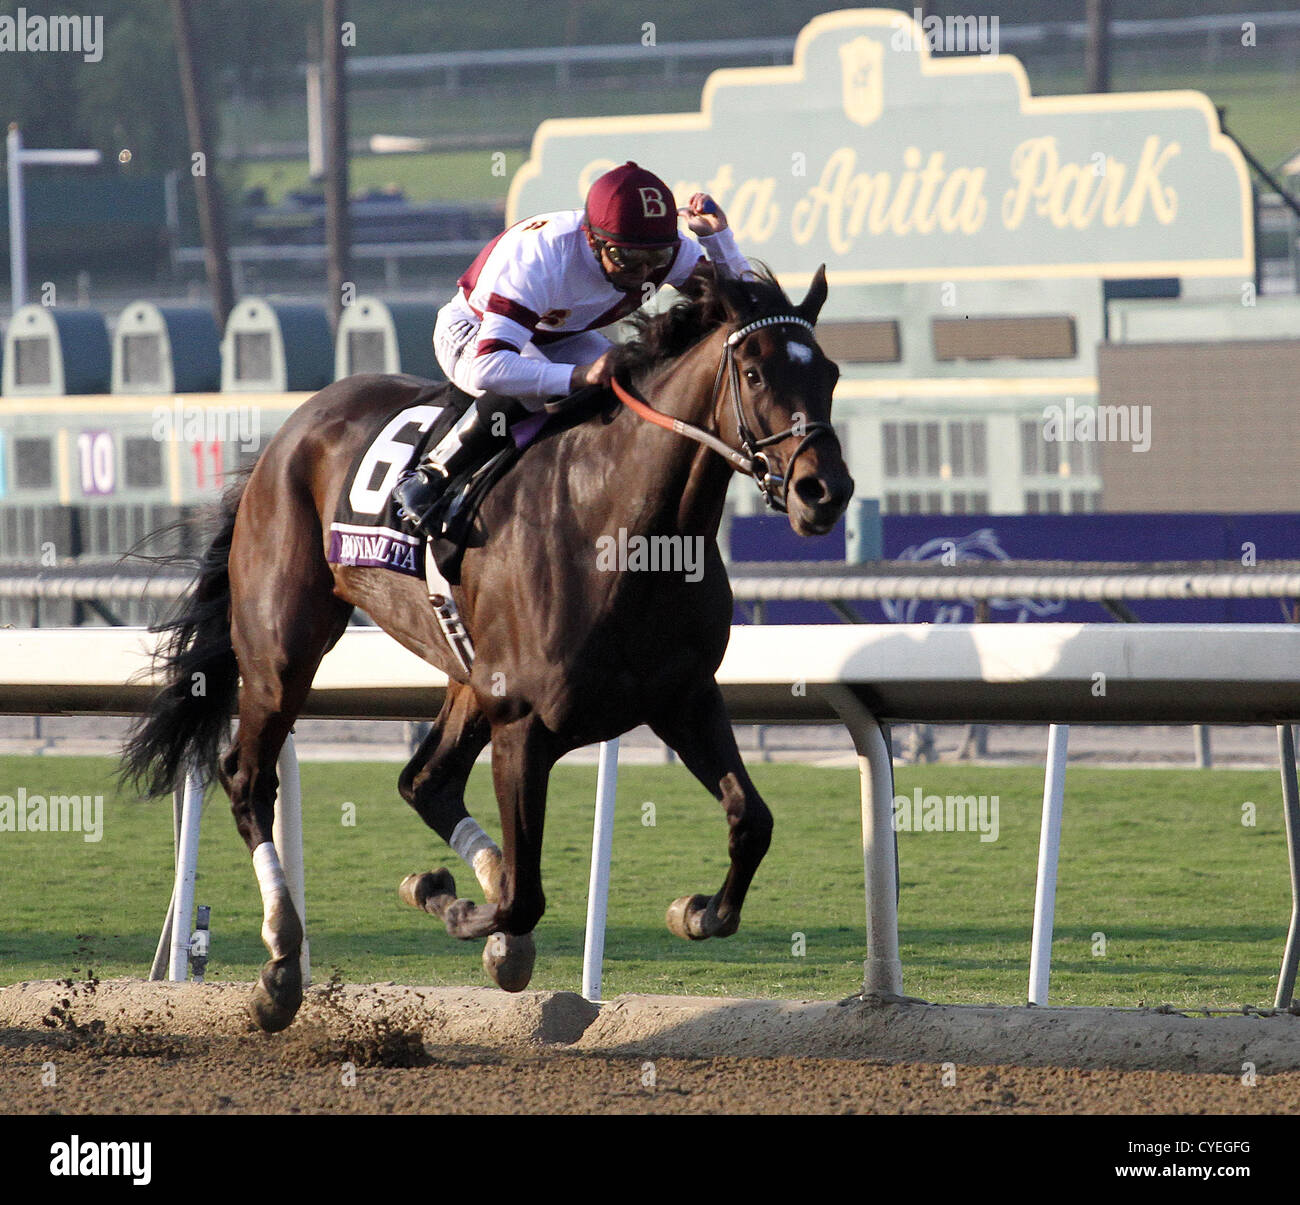 Royal Delta 2012 Breeders' Cup Ladies Classic Photo #1   8" x 10" 